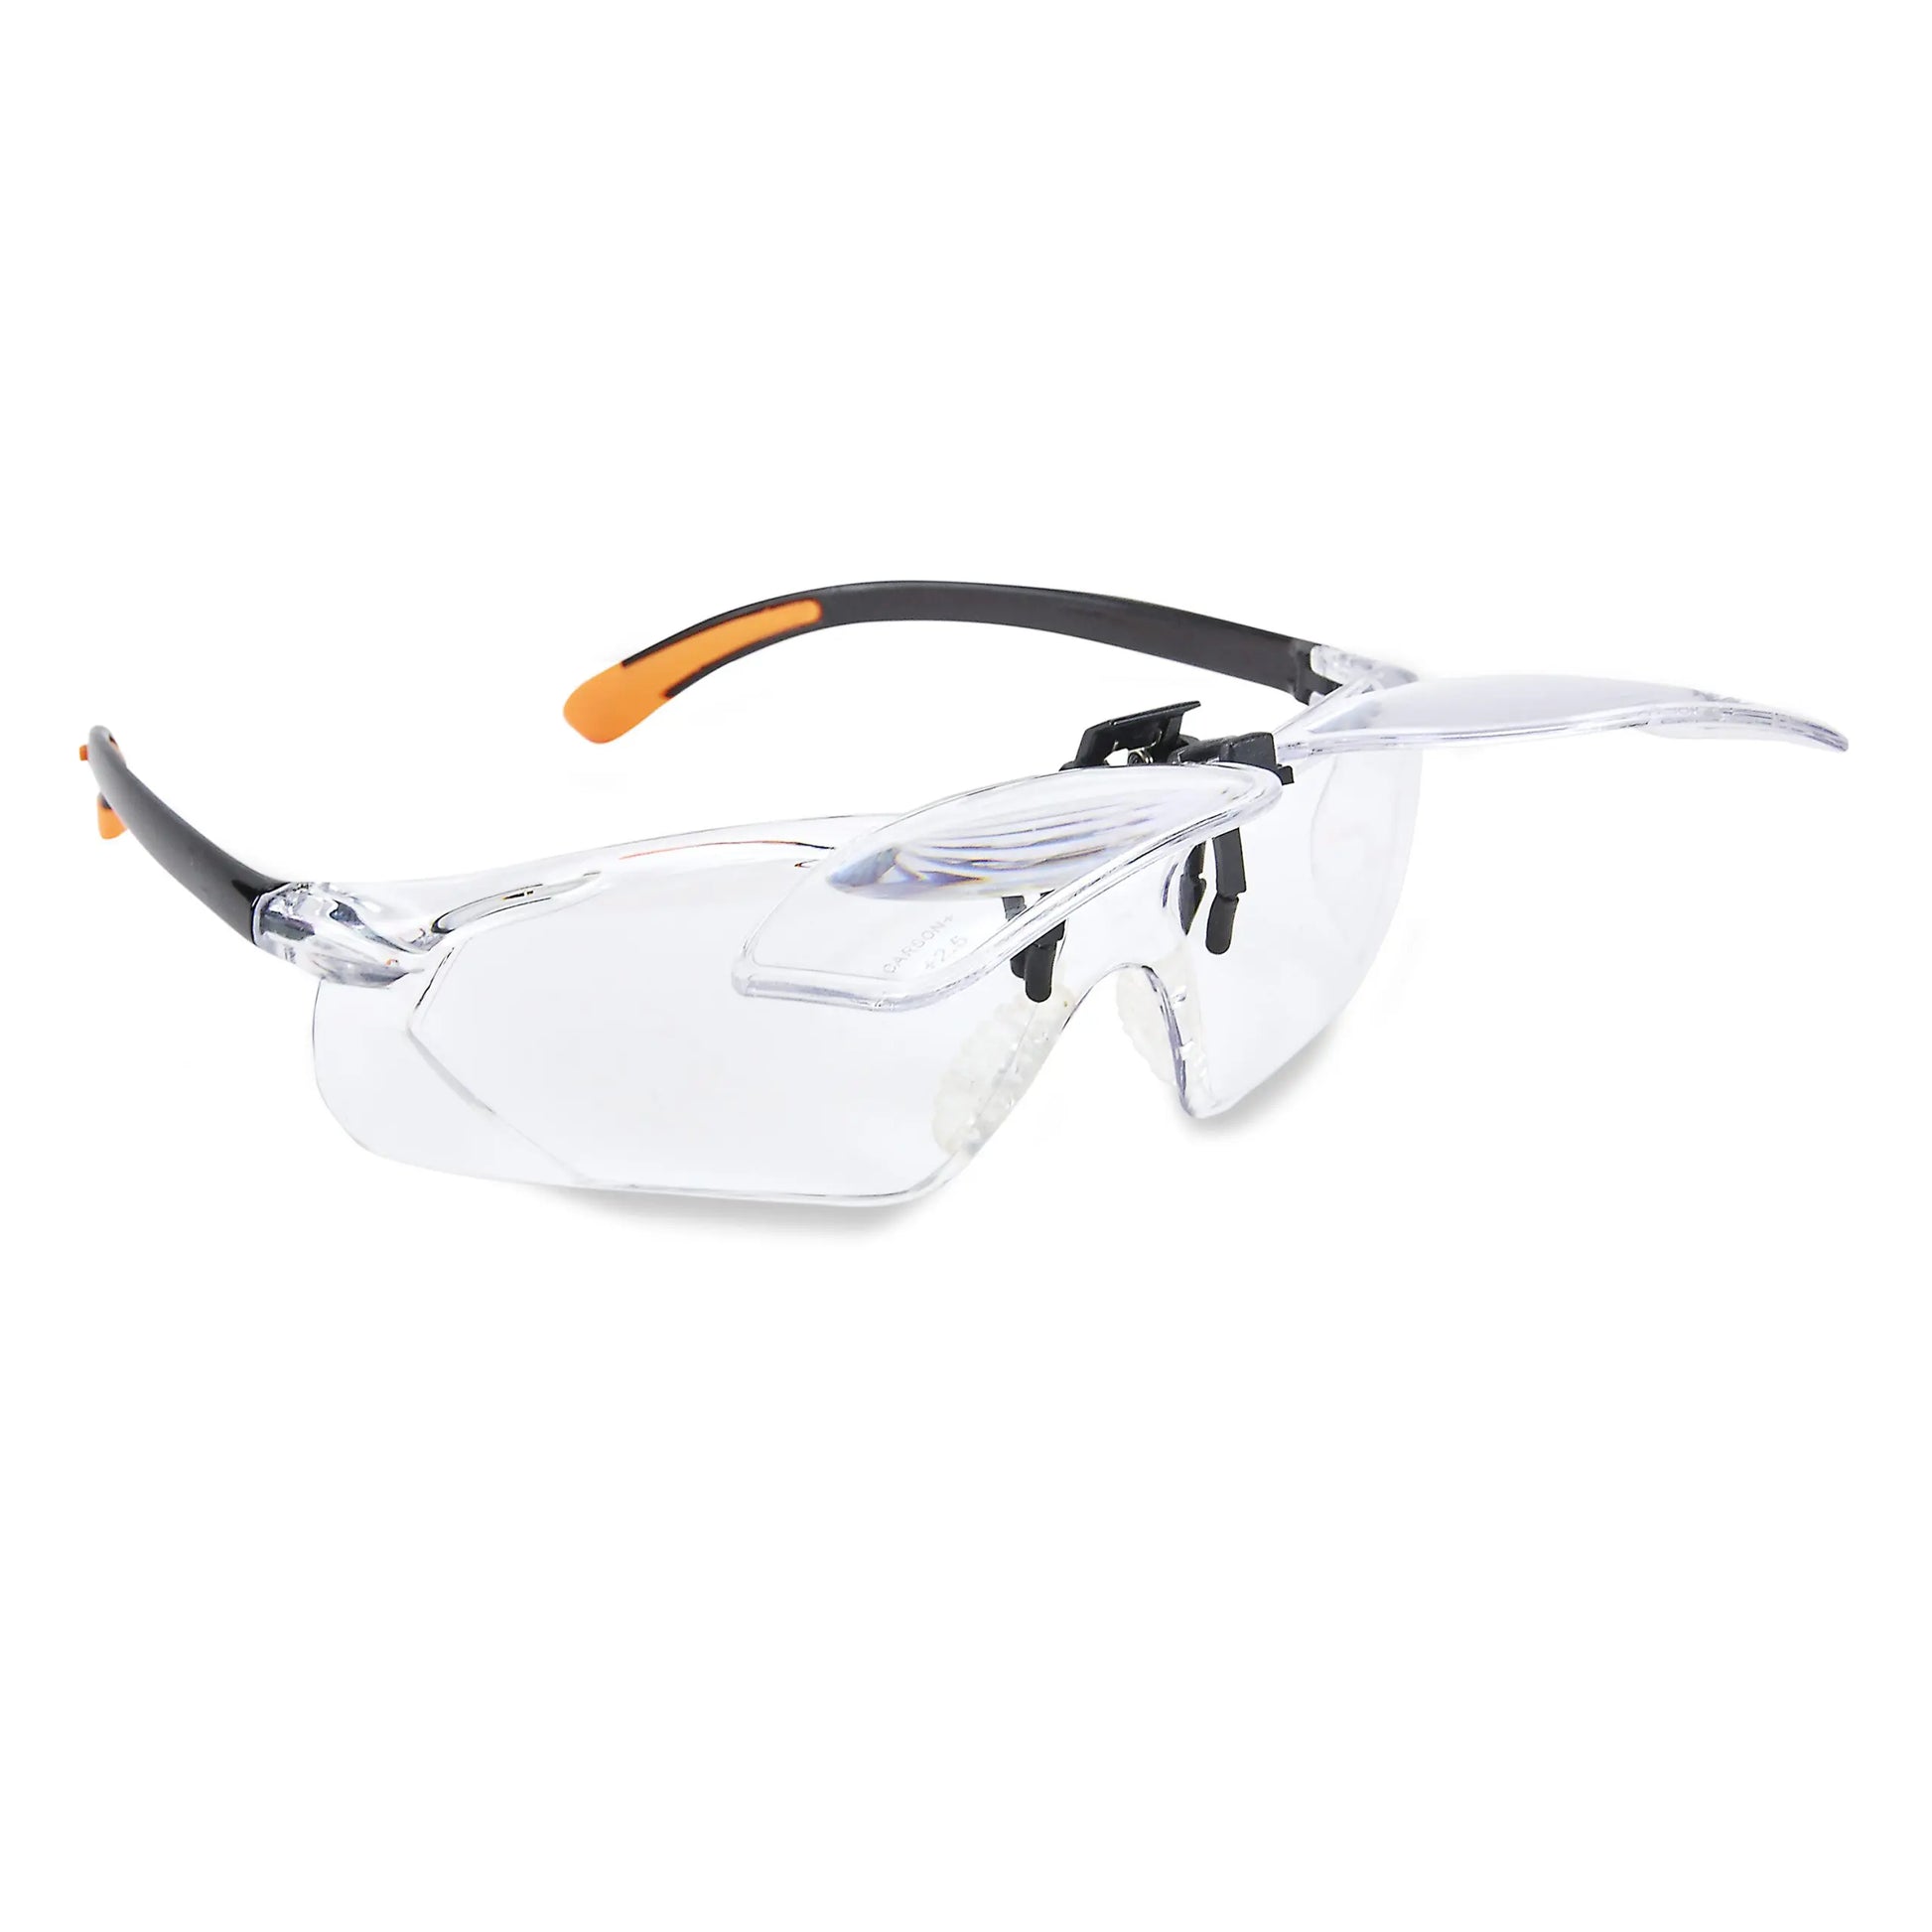 Carson 1.5x (+2.5 Diopter) Flip Up Protective Magnifying Safety Glasses VM-20 - EDISLA